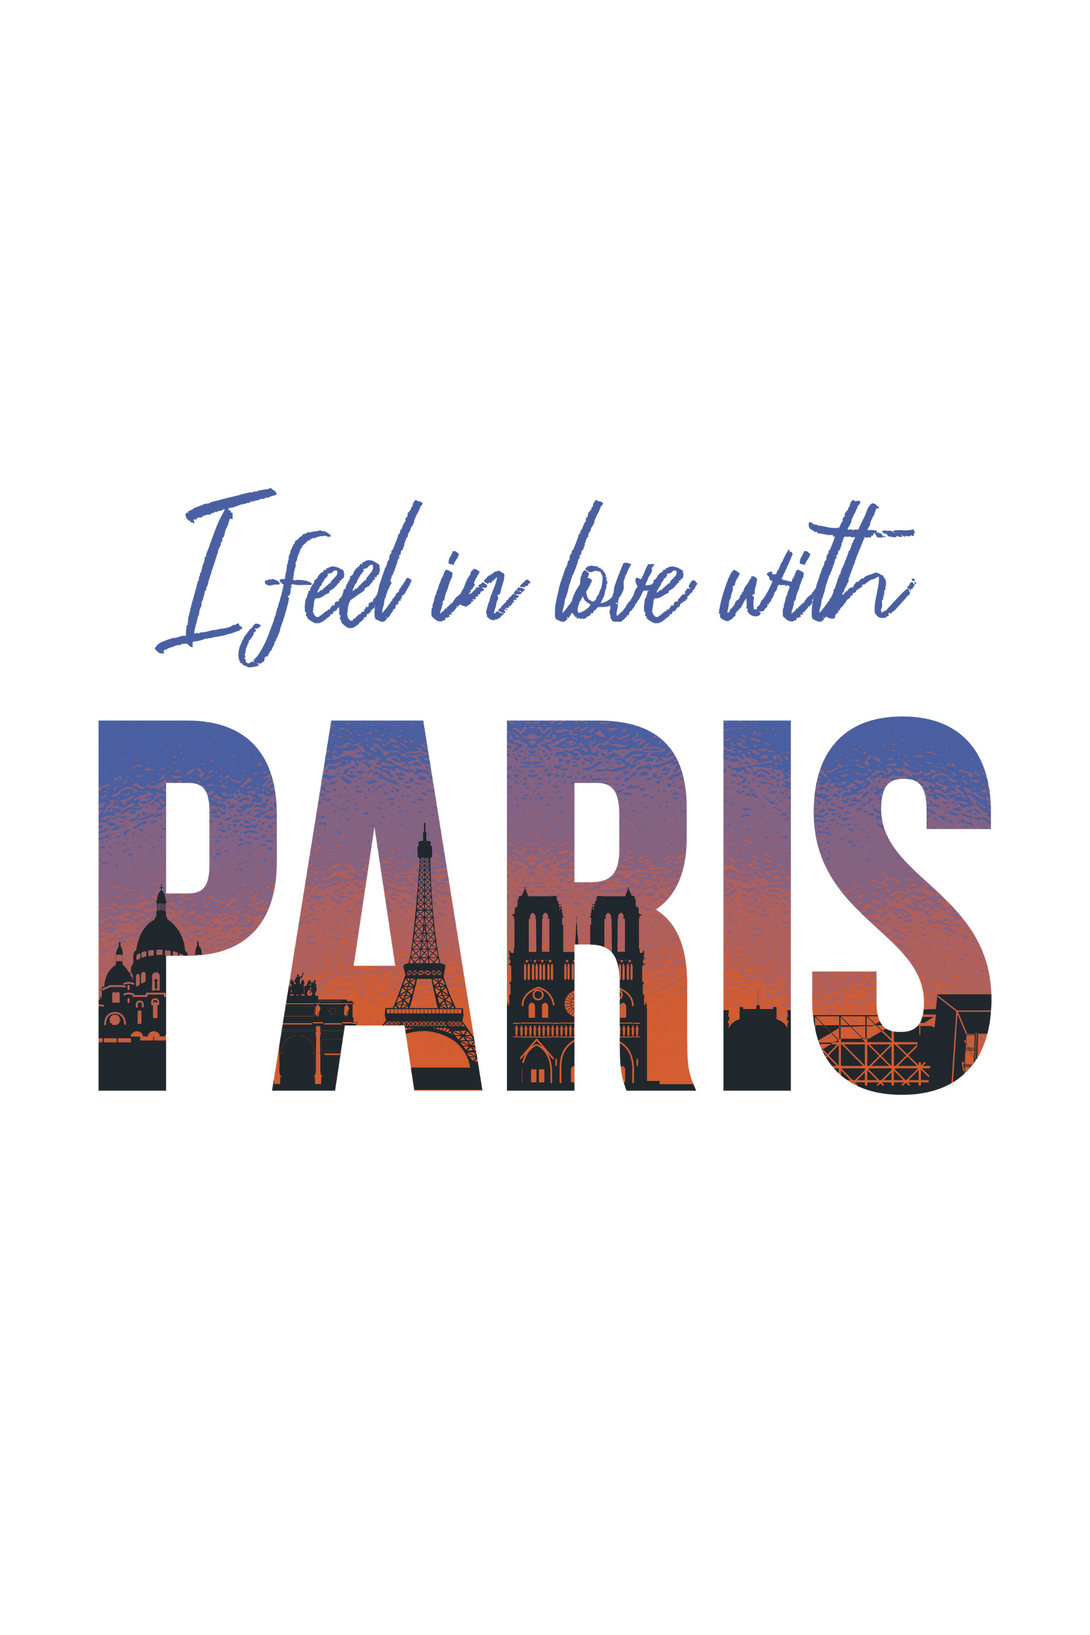 In Love With Paris Printed T-Shirt For Women - WowWaves - 1